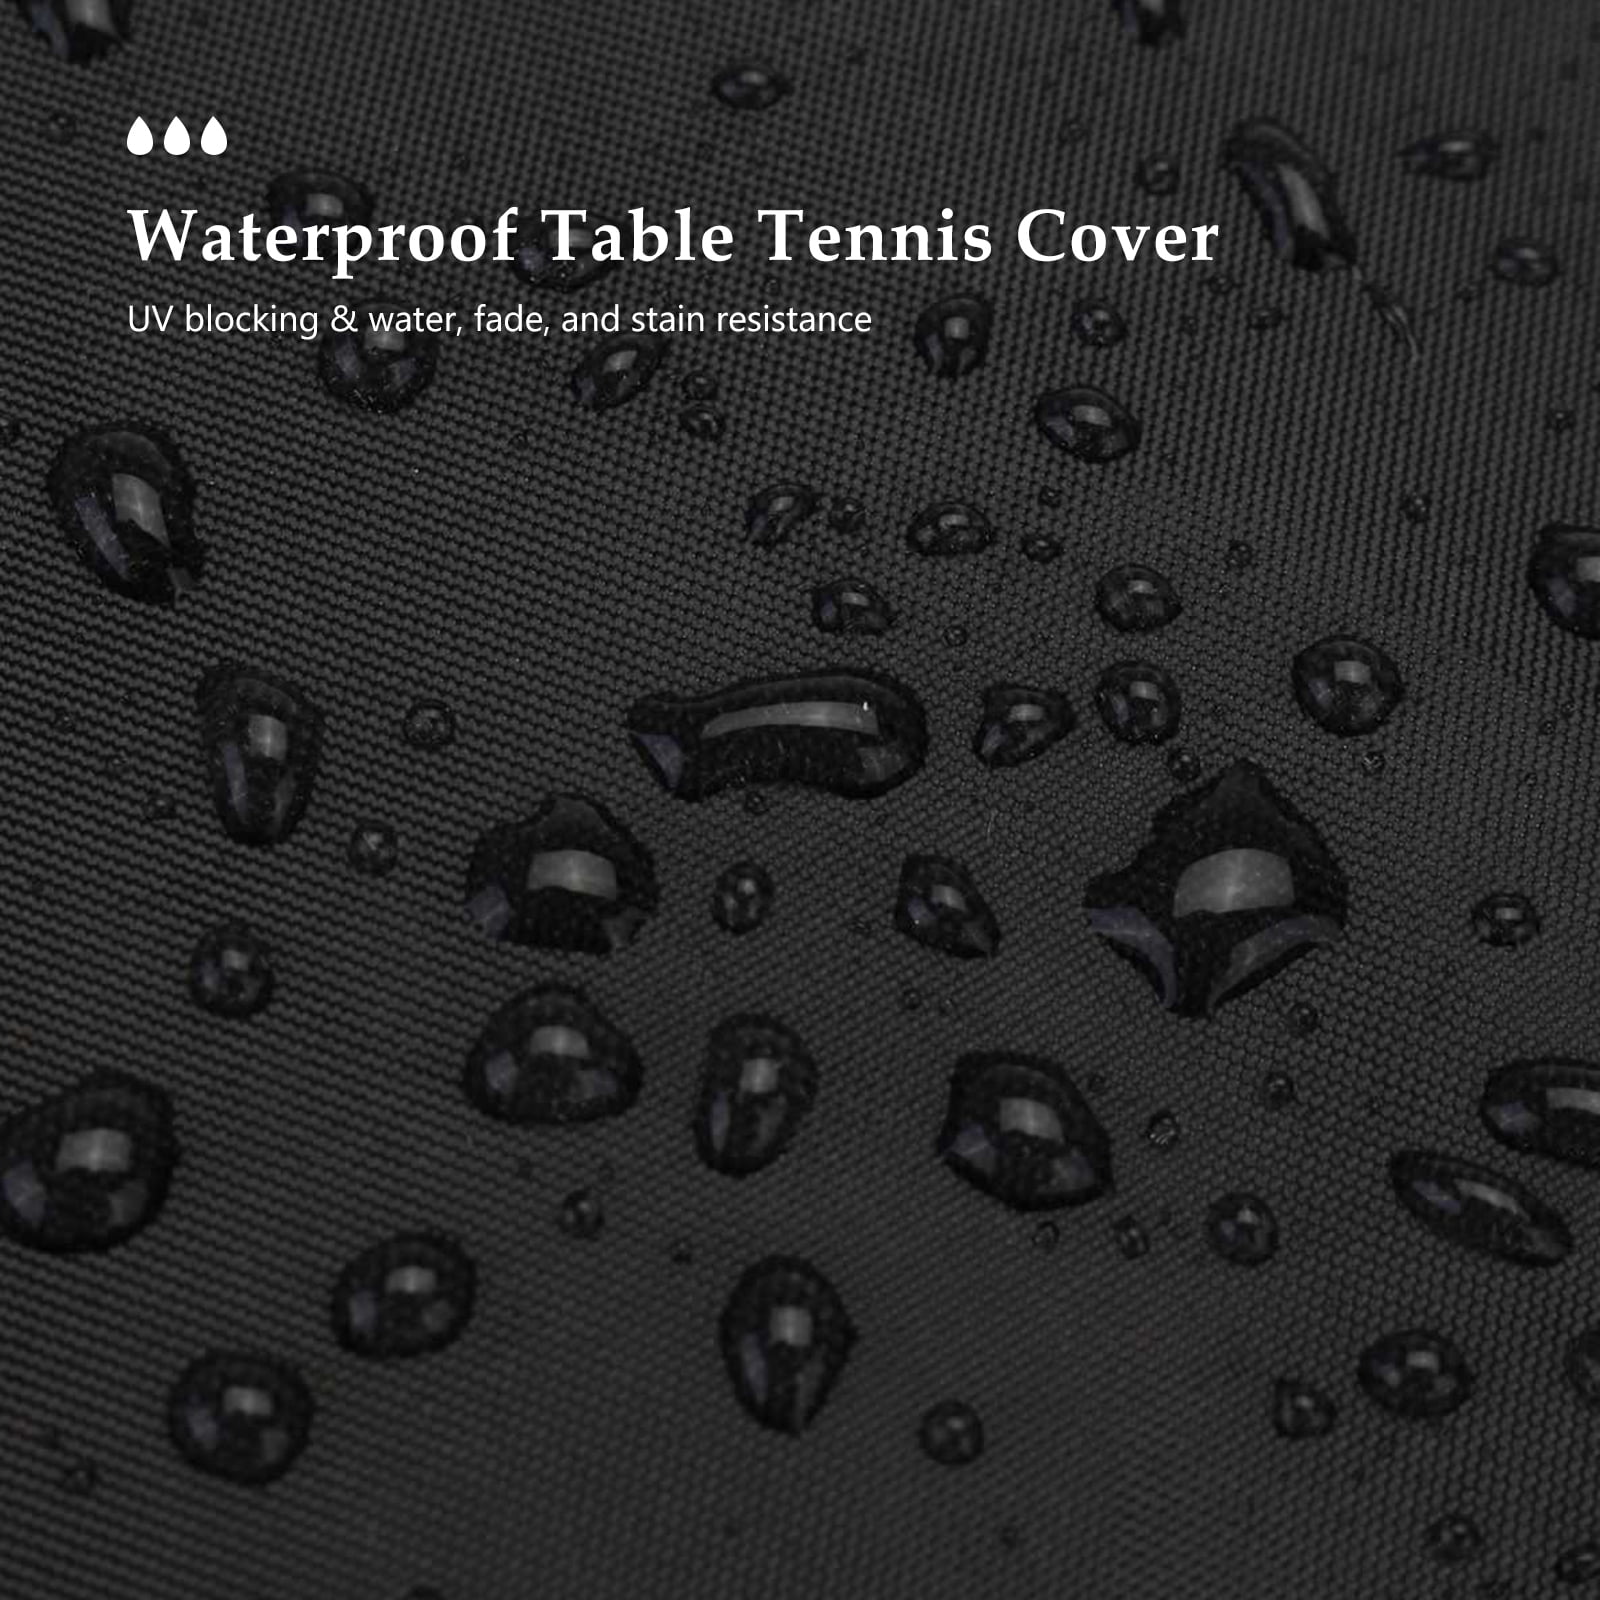 Ping Pong Cover Indoor Oxford cloth Table Tennis Protective Waterproof 